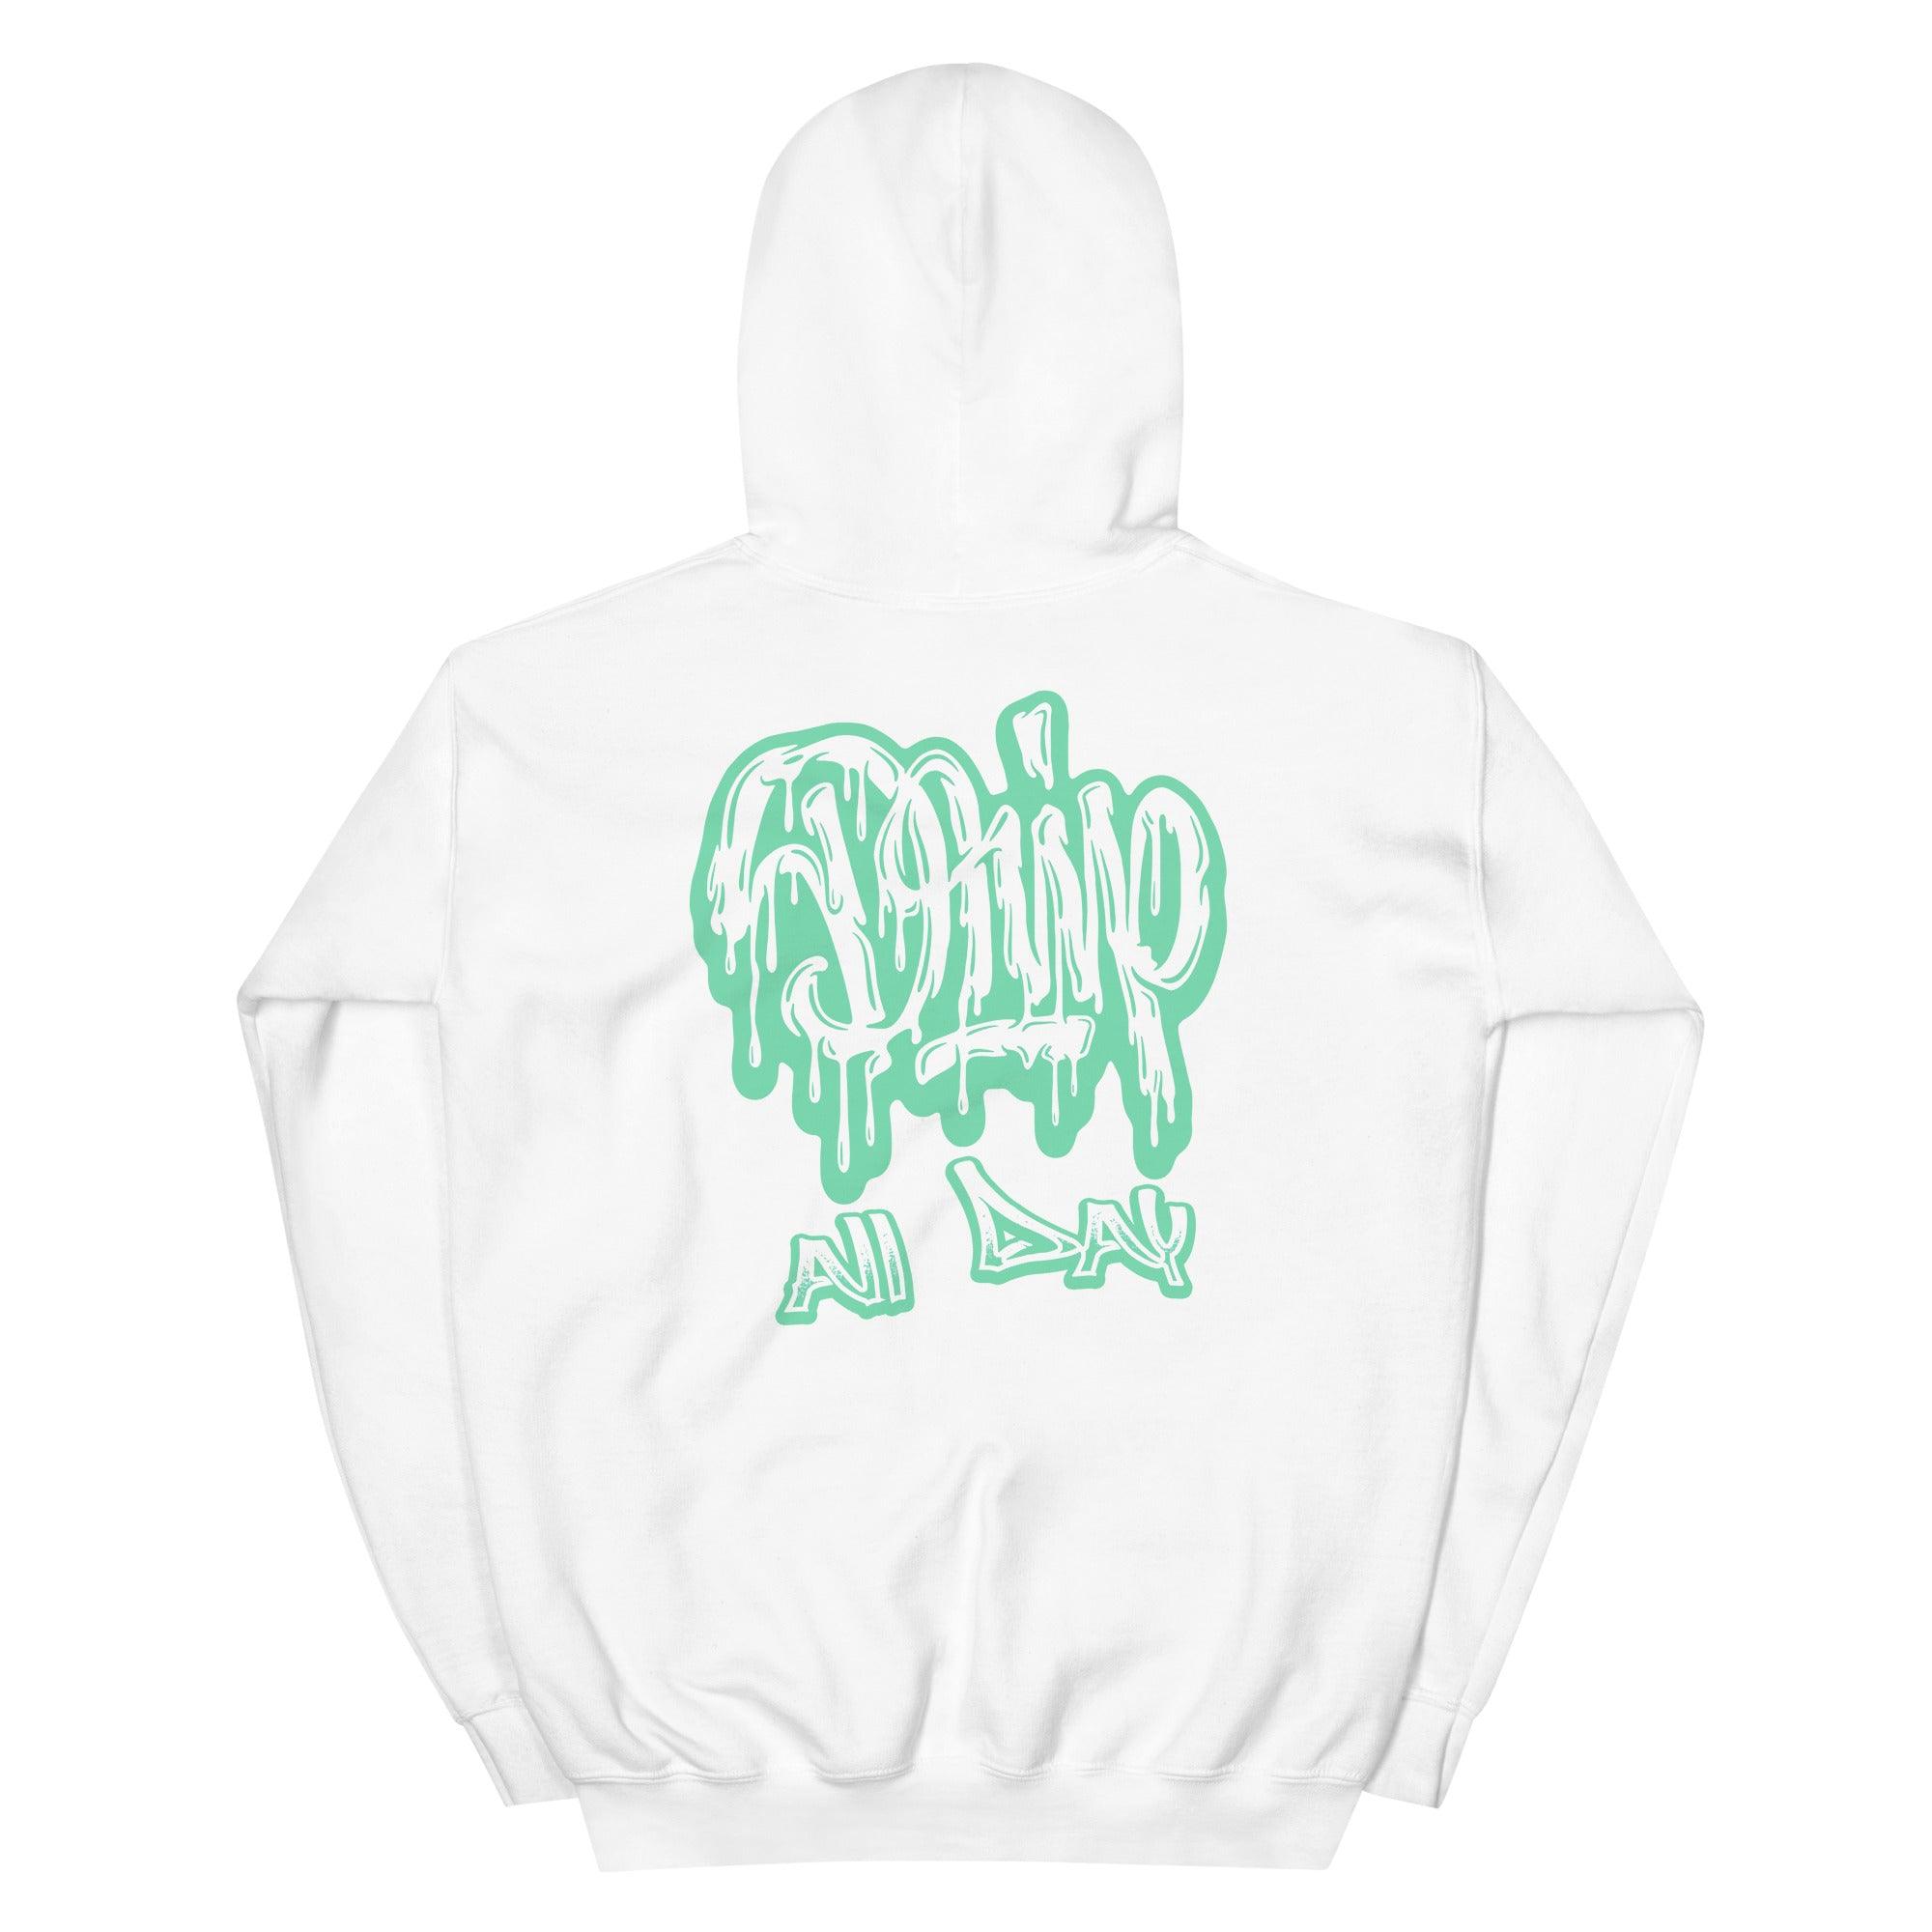 White Drip All Day Hoodie Nike Dunks Low Green Glow photo